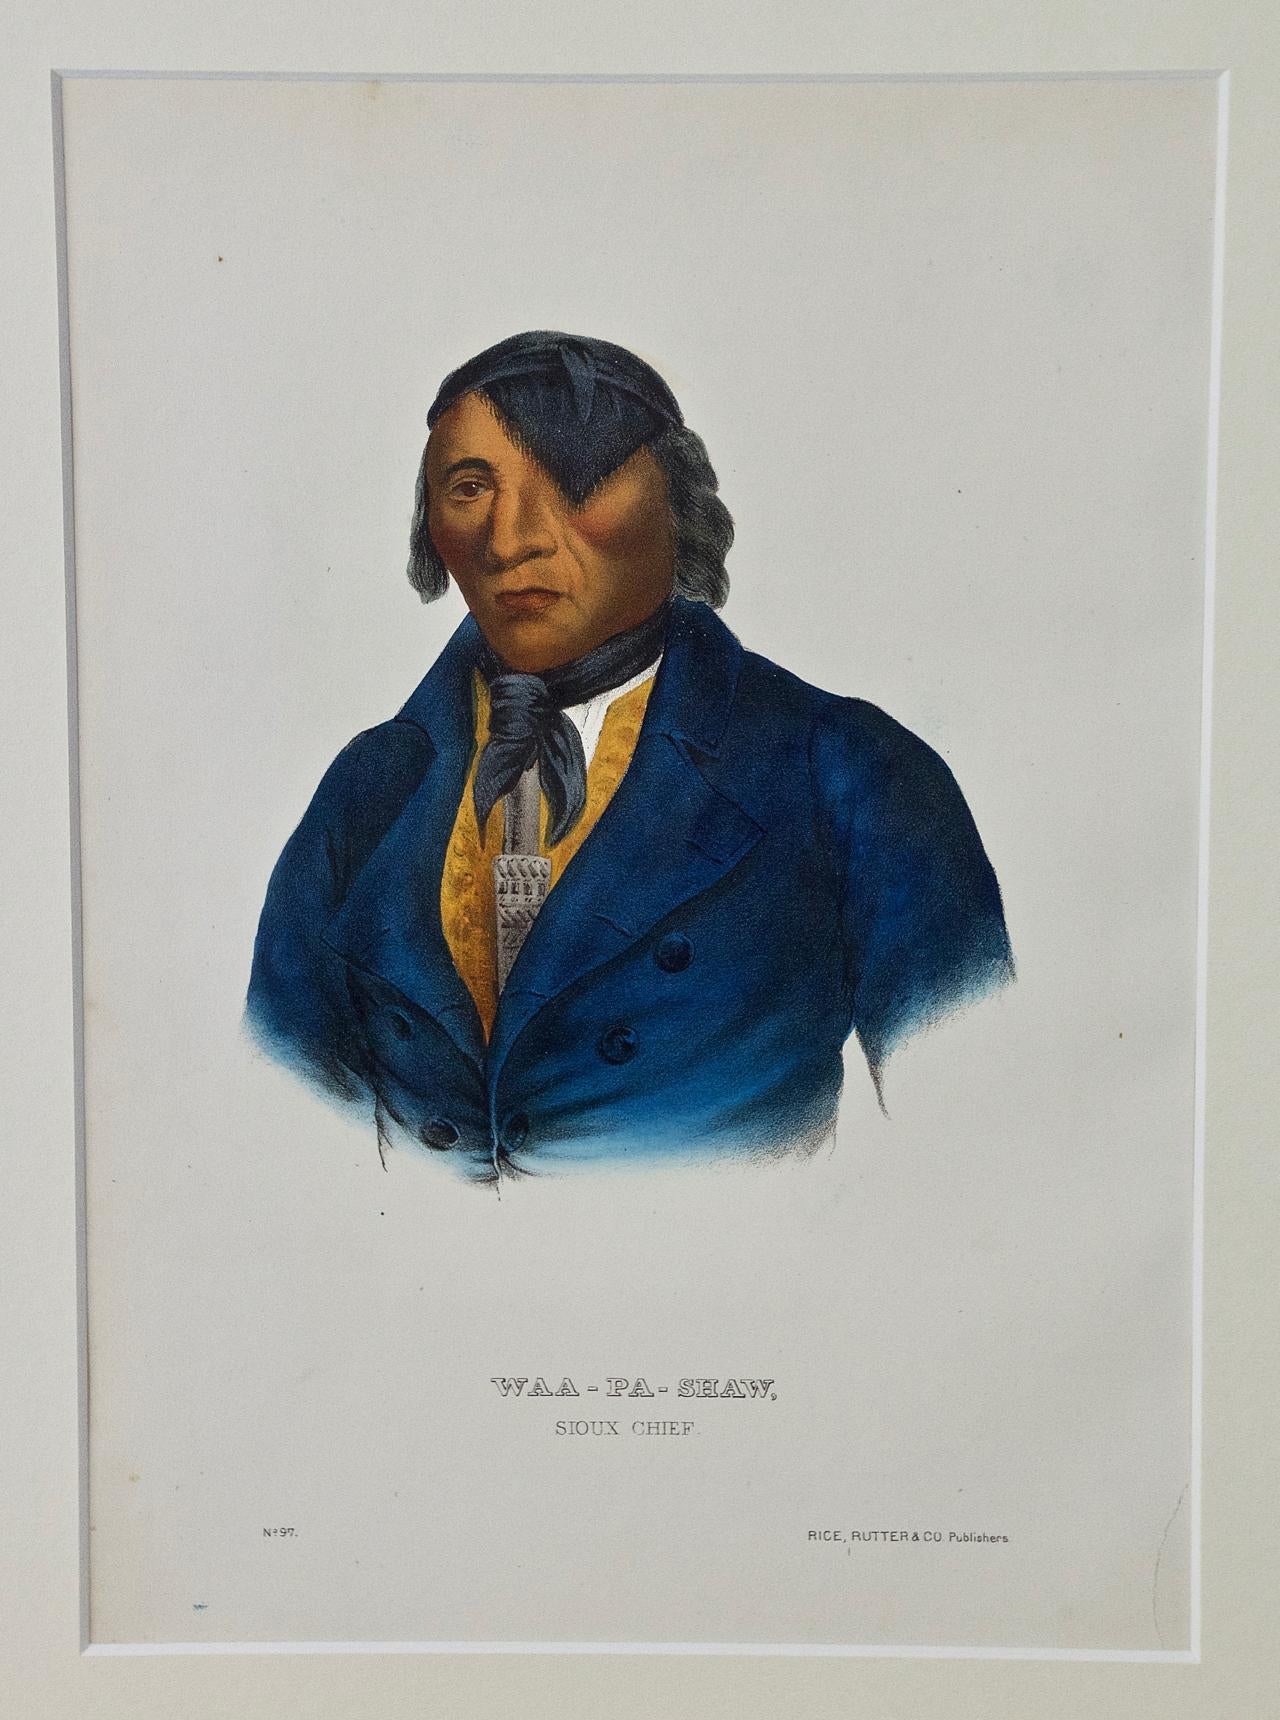 Waa-Pa-Shaw, Sioux Chief: An Original Hand-colored McKenney & Hall Engraving